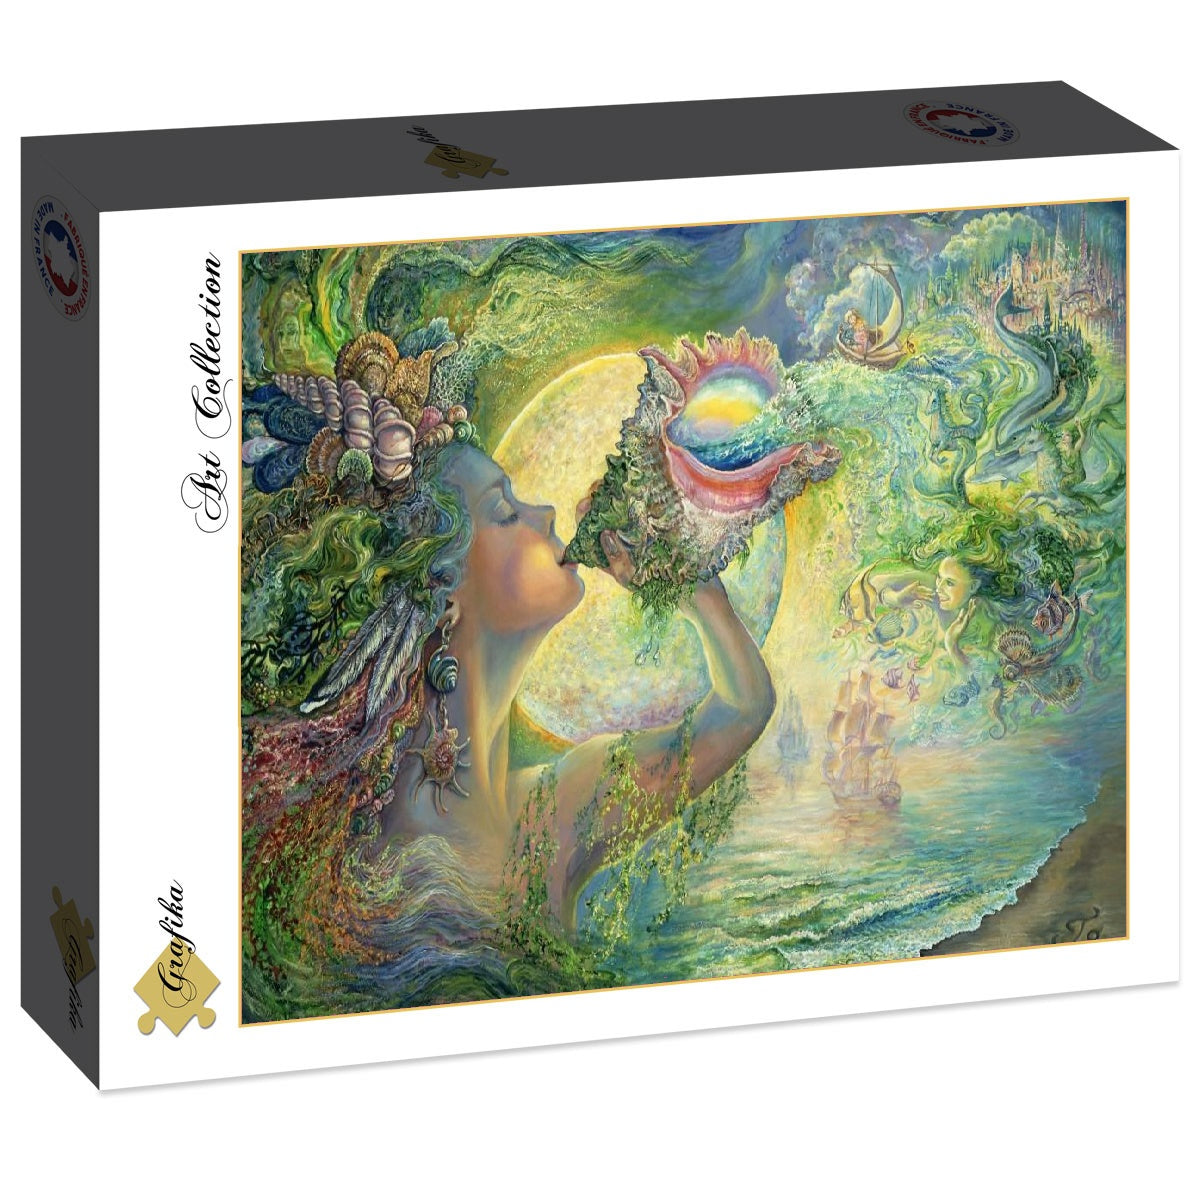 Call of the Sea by Josephine Wall, 1500 Piece Puzzle